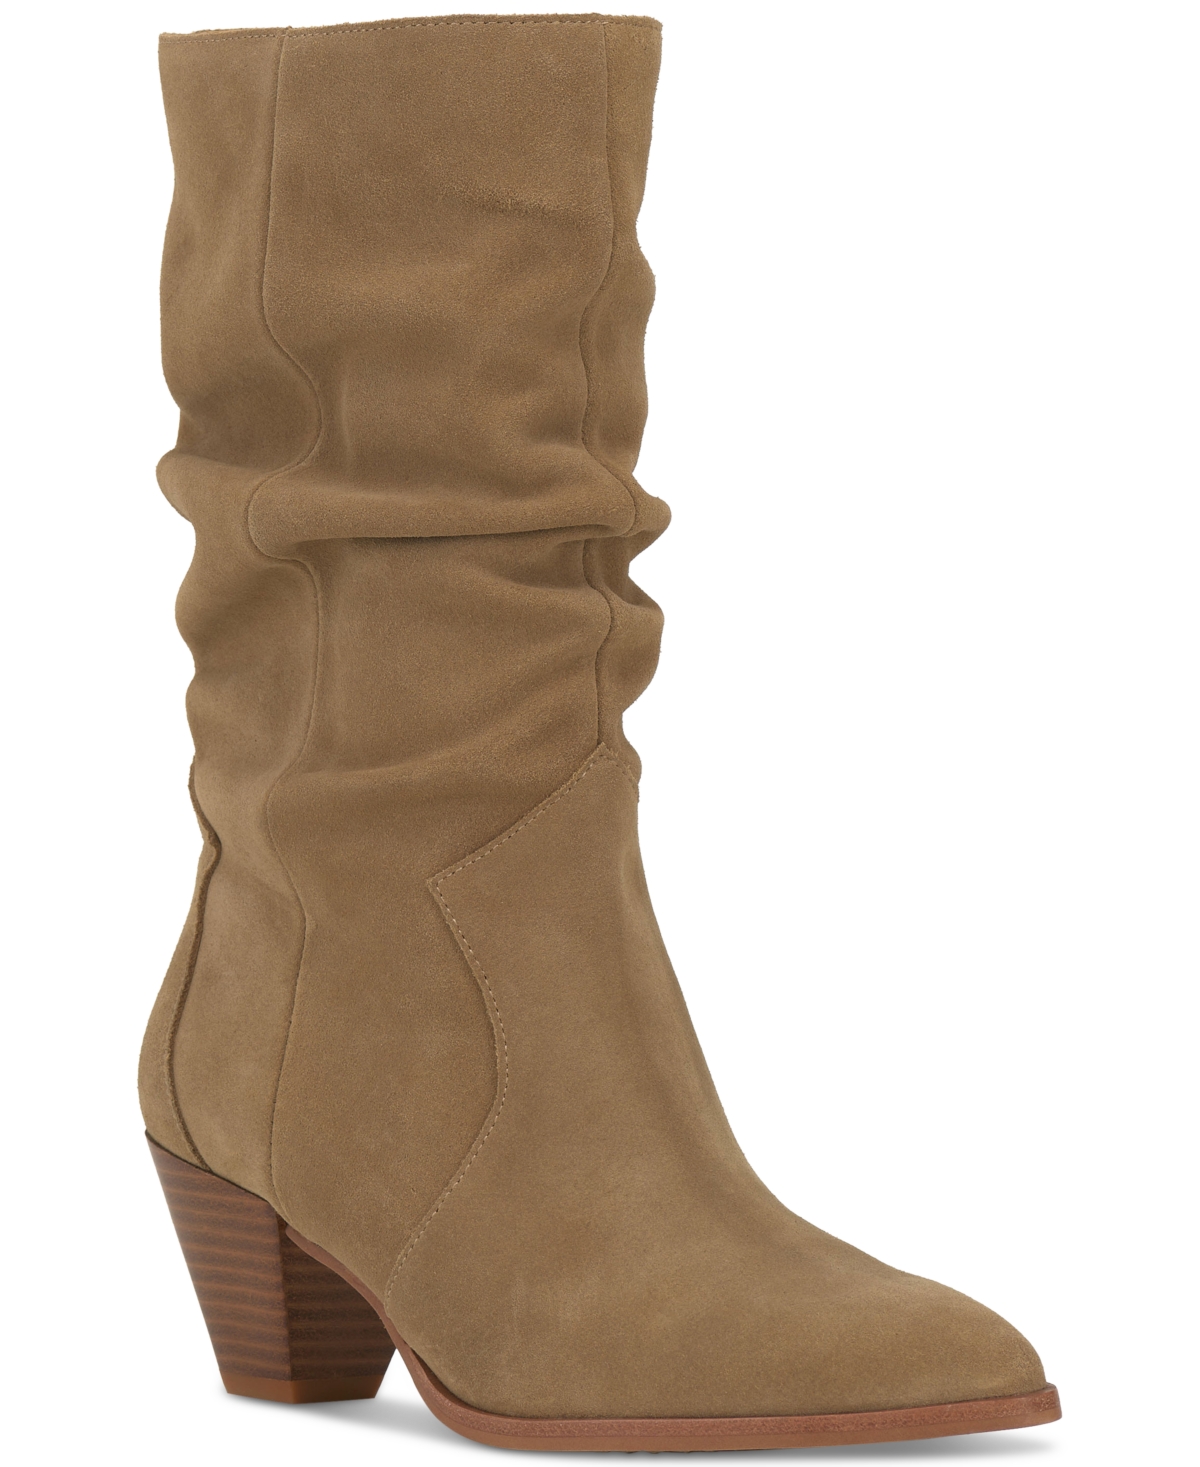 VINCE CAMUTO WOMEN'S SENSENNY SLOUCH BOOTIES